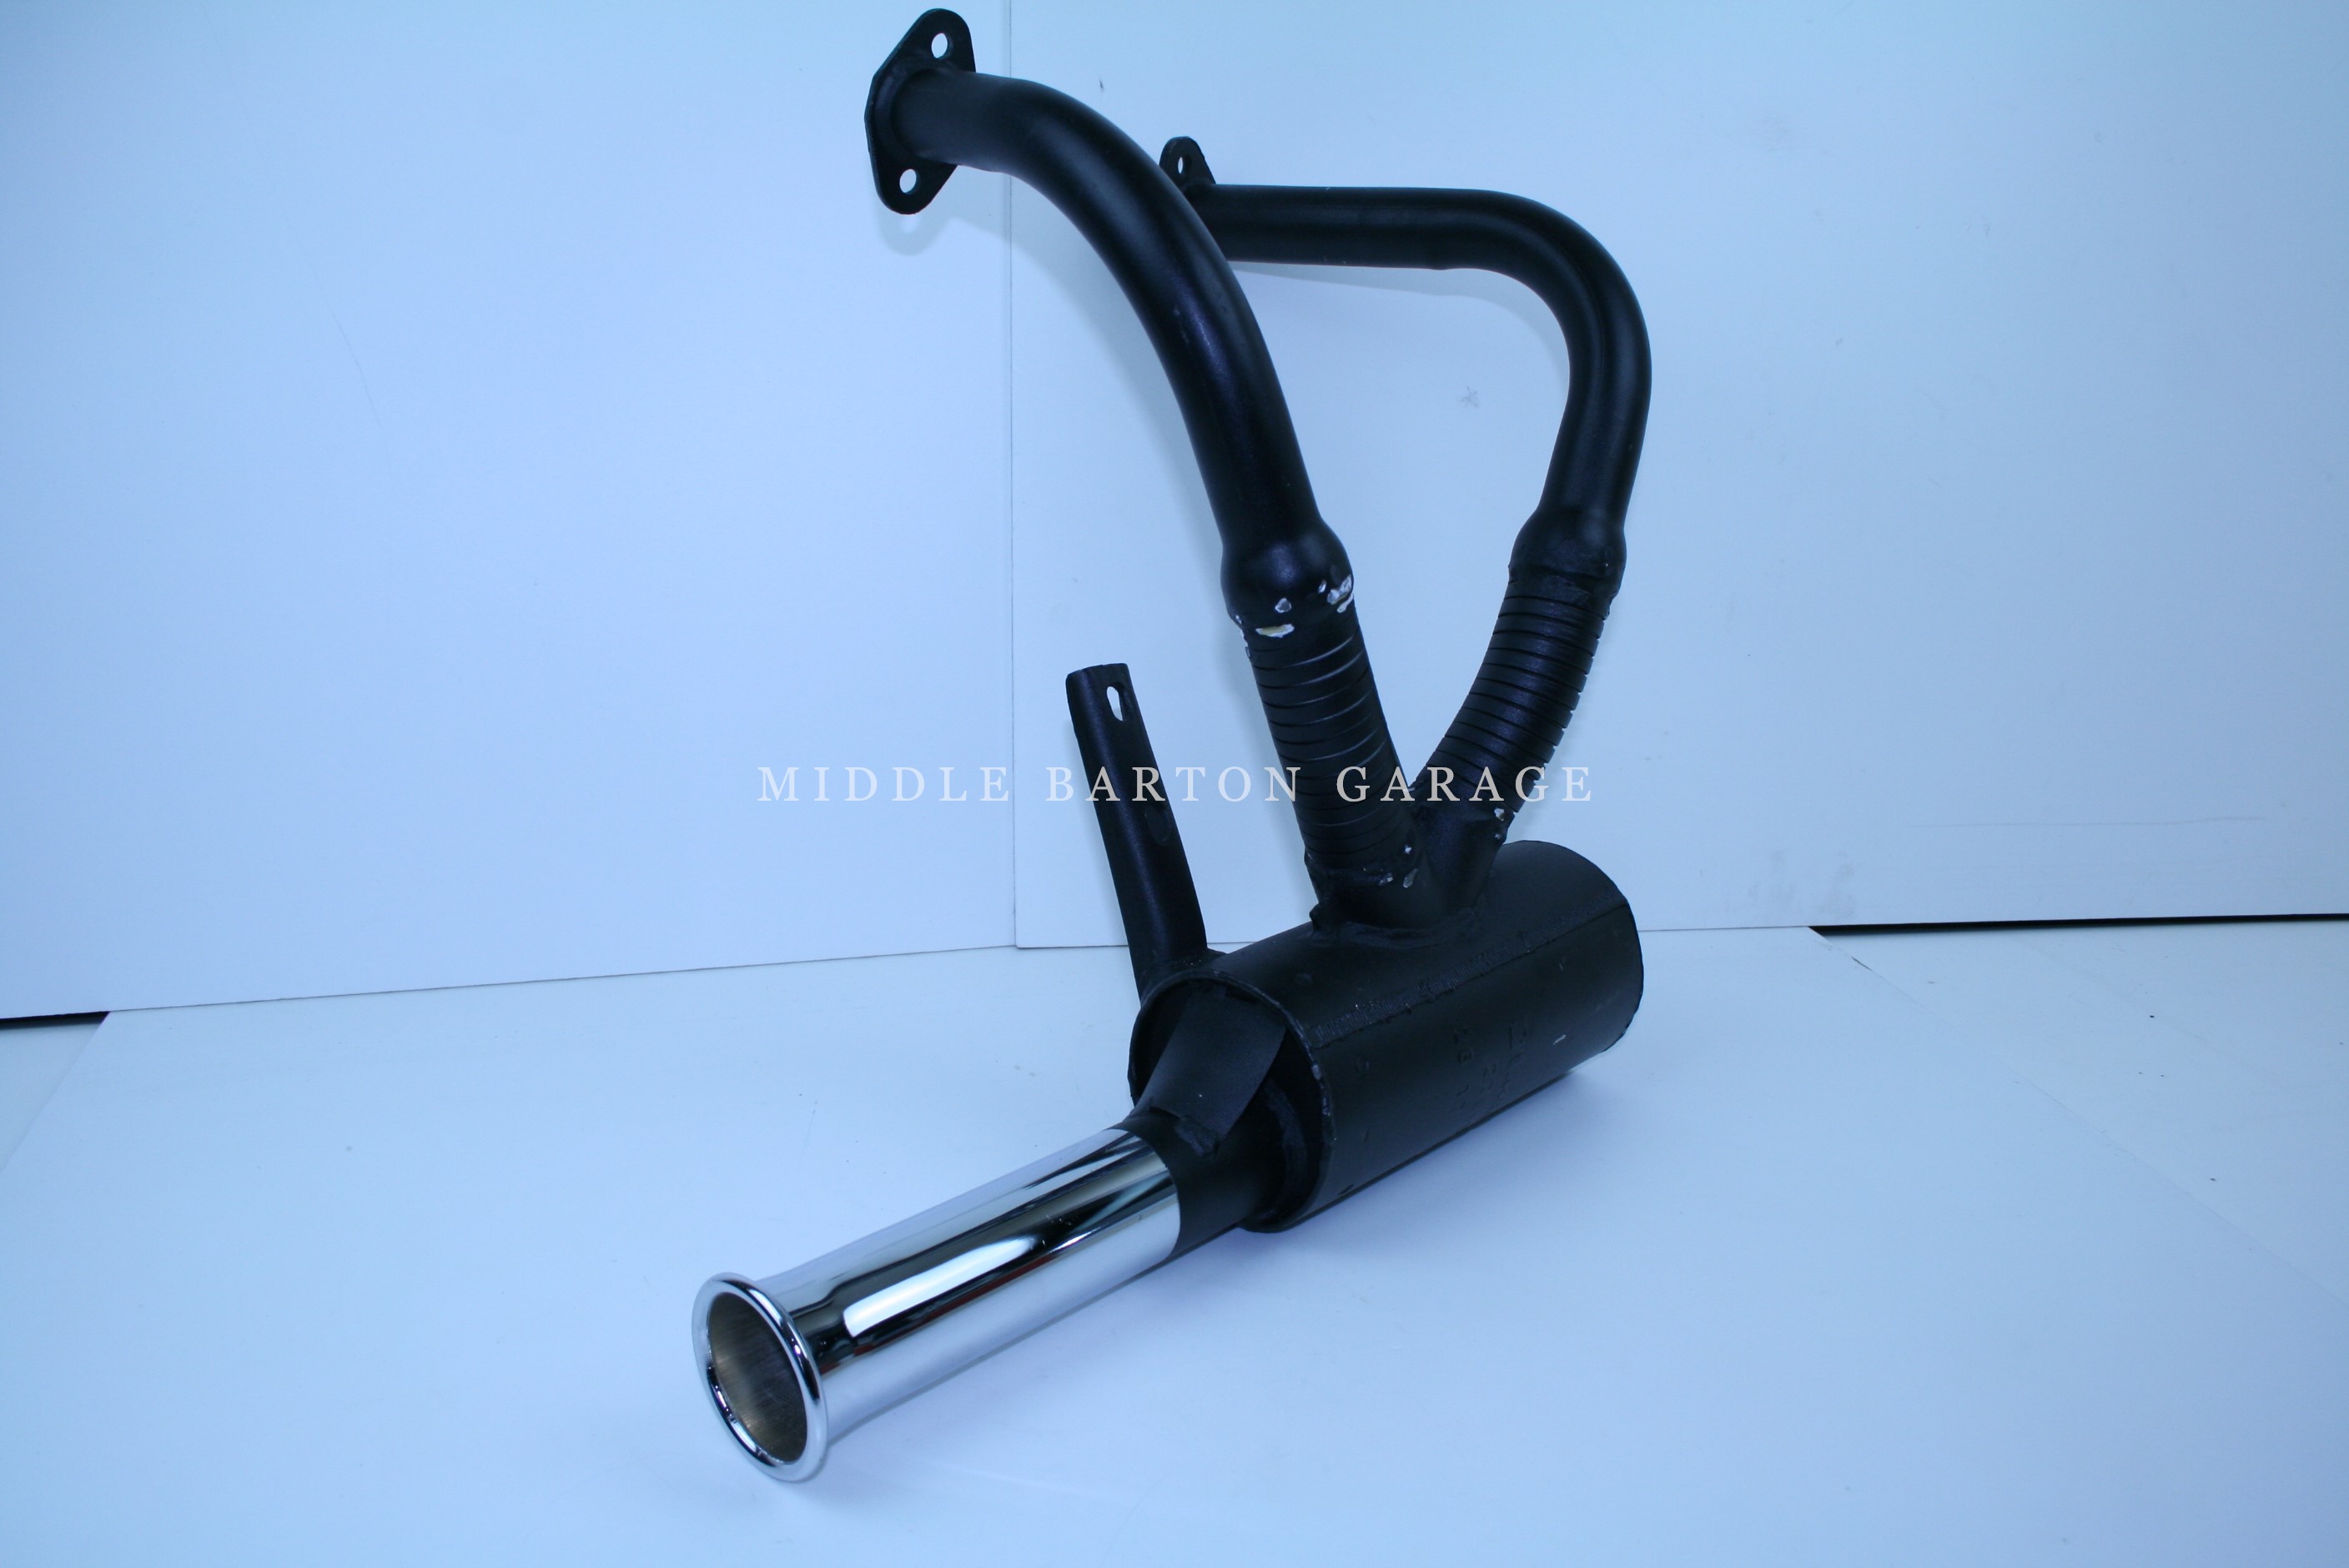 SPORTS EXHAUST FIAT 500 (WITH FLEX JOINT) - EXHAUST SYSTEM - Fiat 500